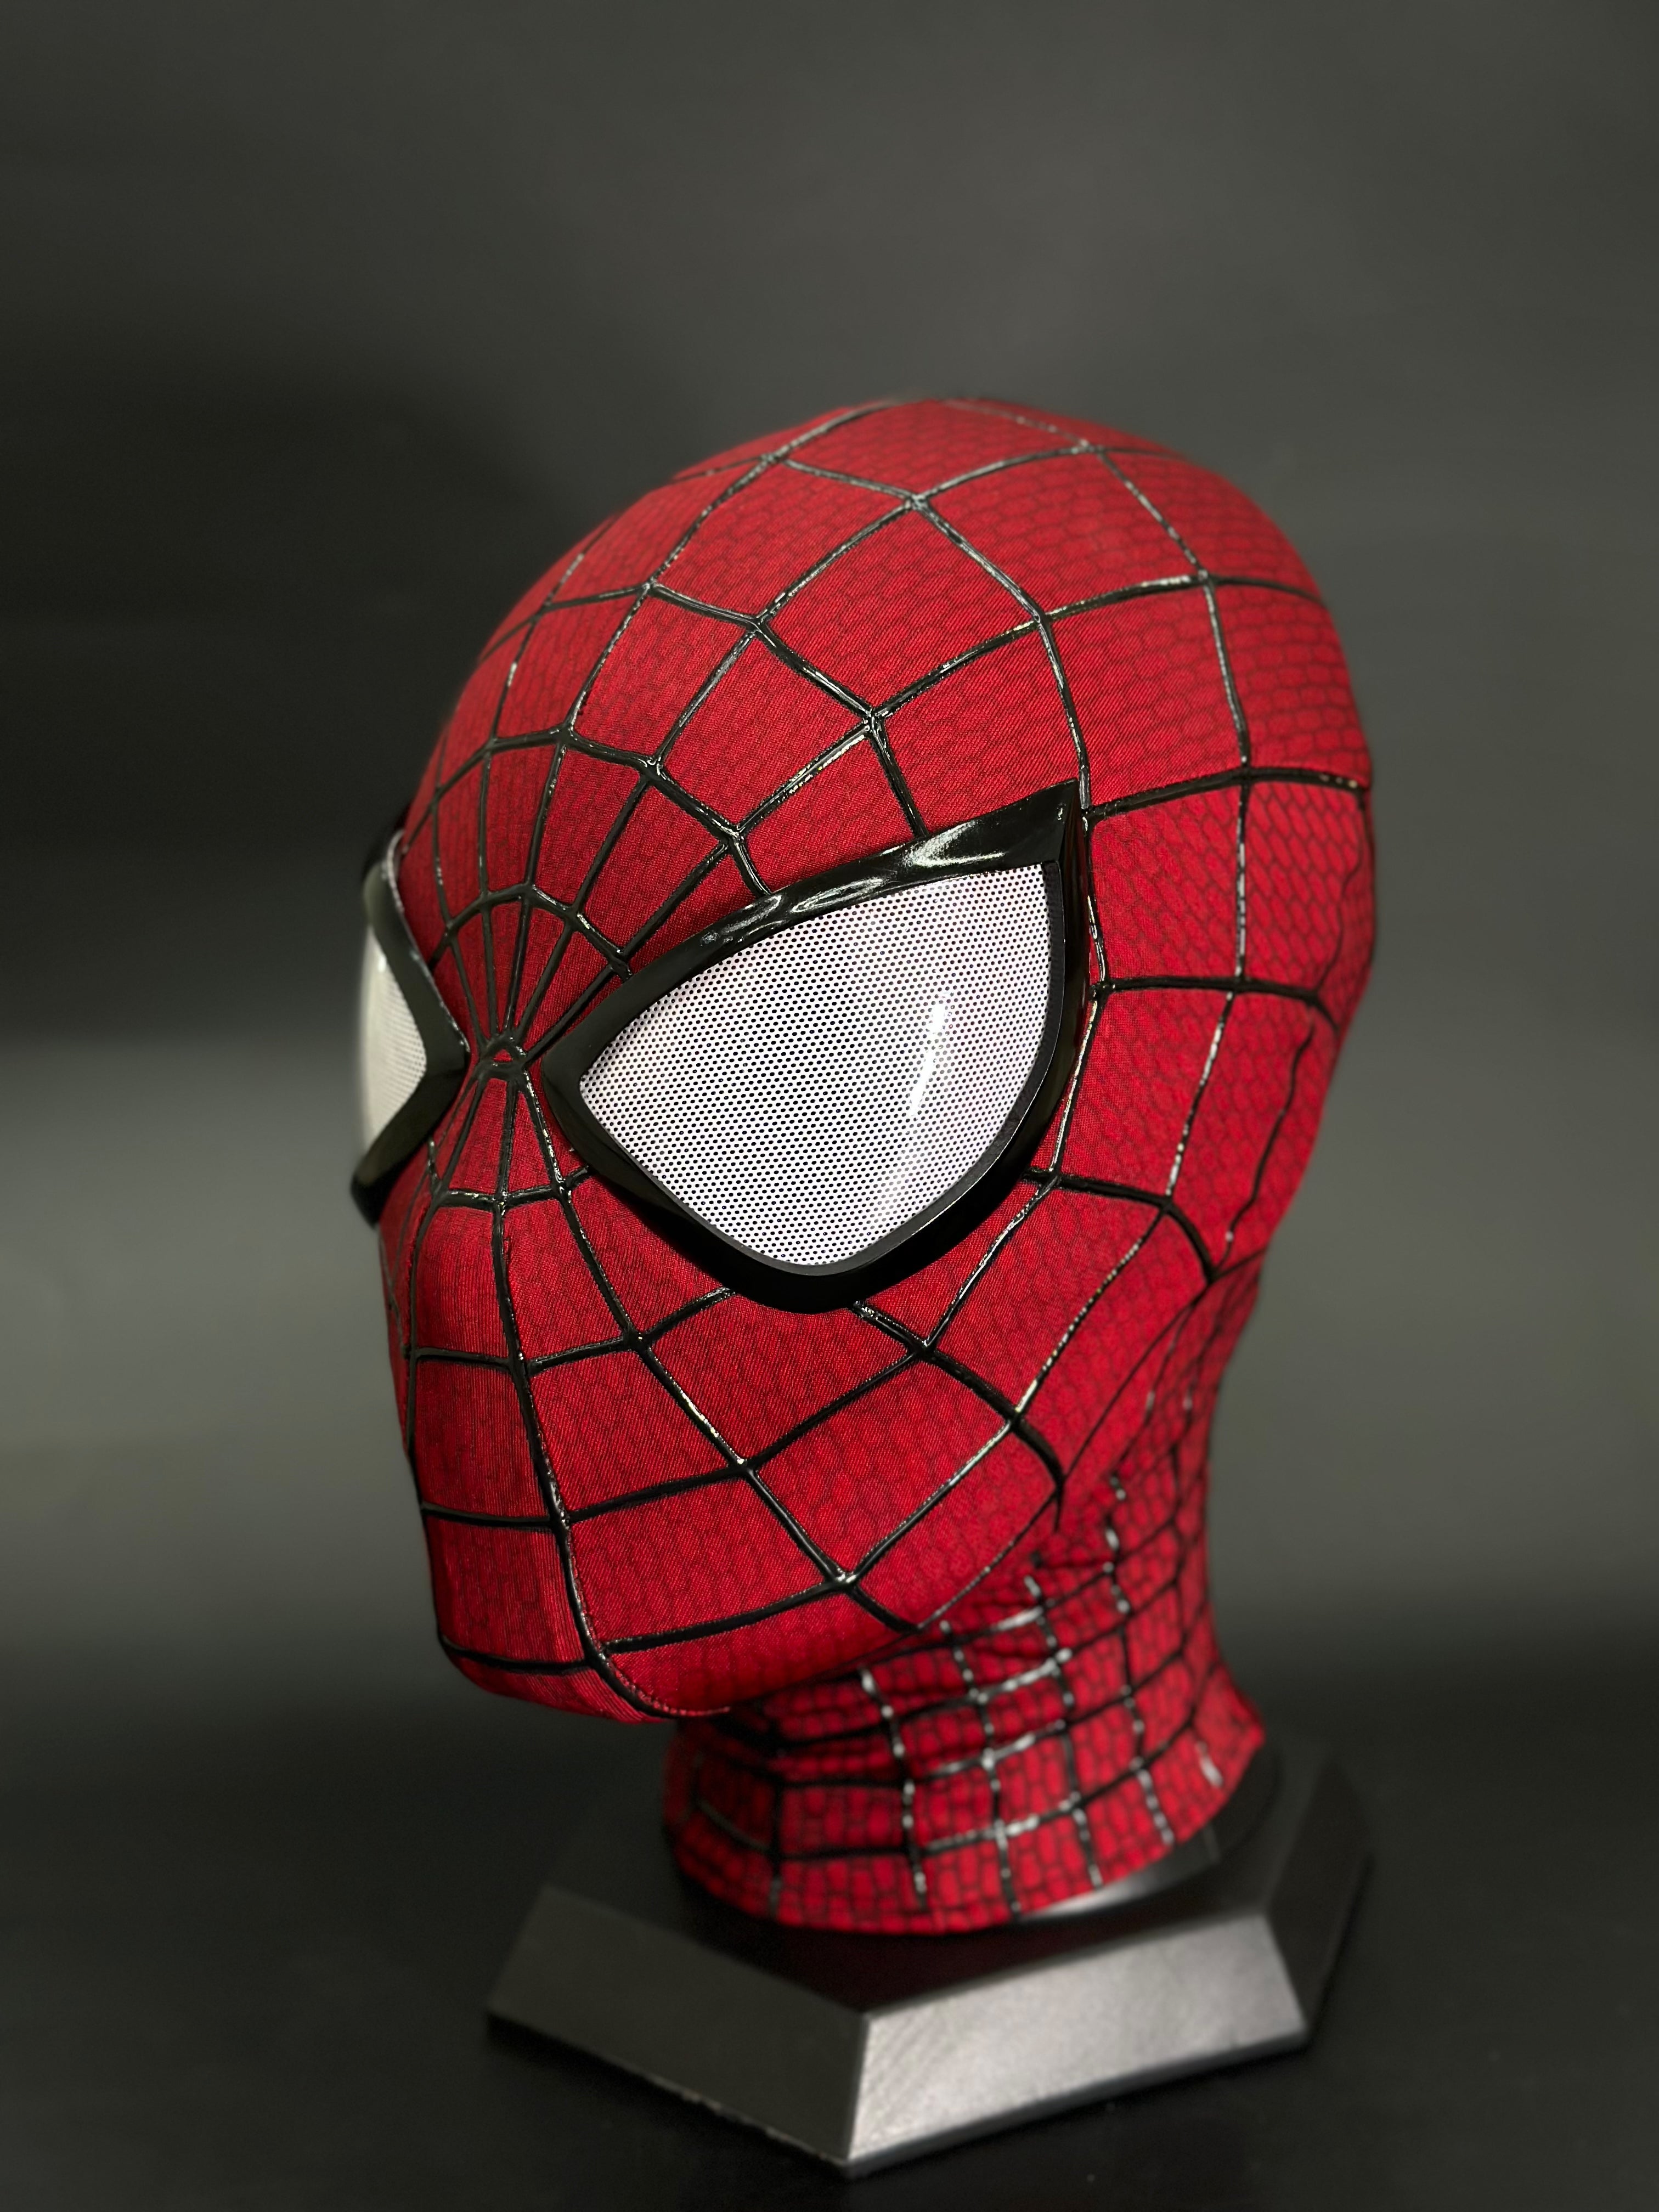 V3 TASM 2 mask (Andrew) with Faceshell and Lenses Wearable Movie Prop Replica (Adult)